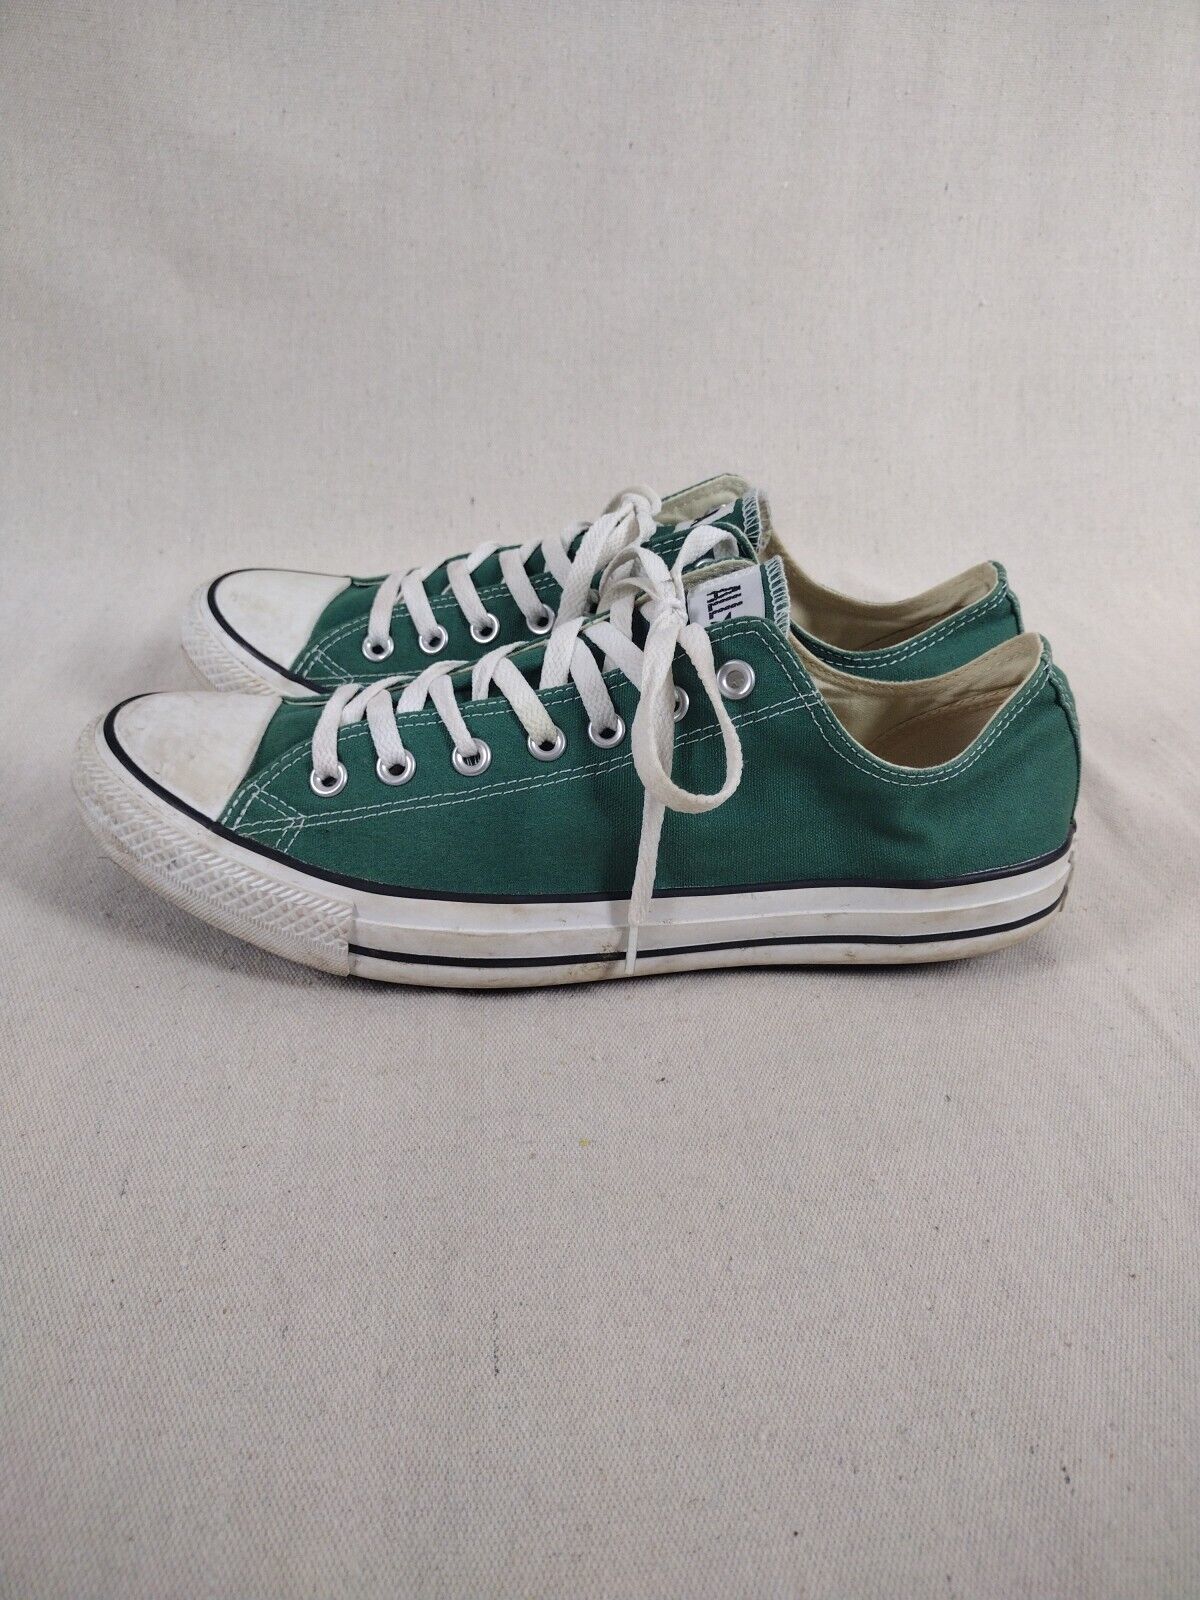 Unisex Green Converse All Stars Low Tennis Shoes … - image 2